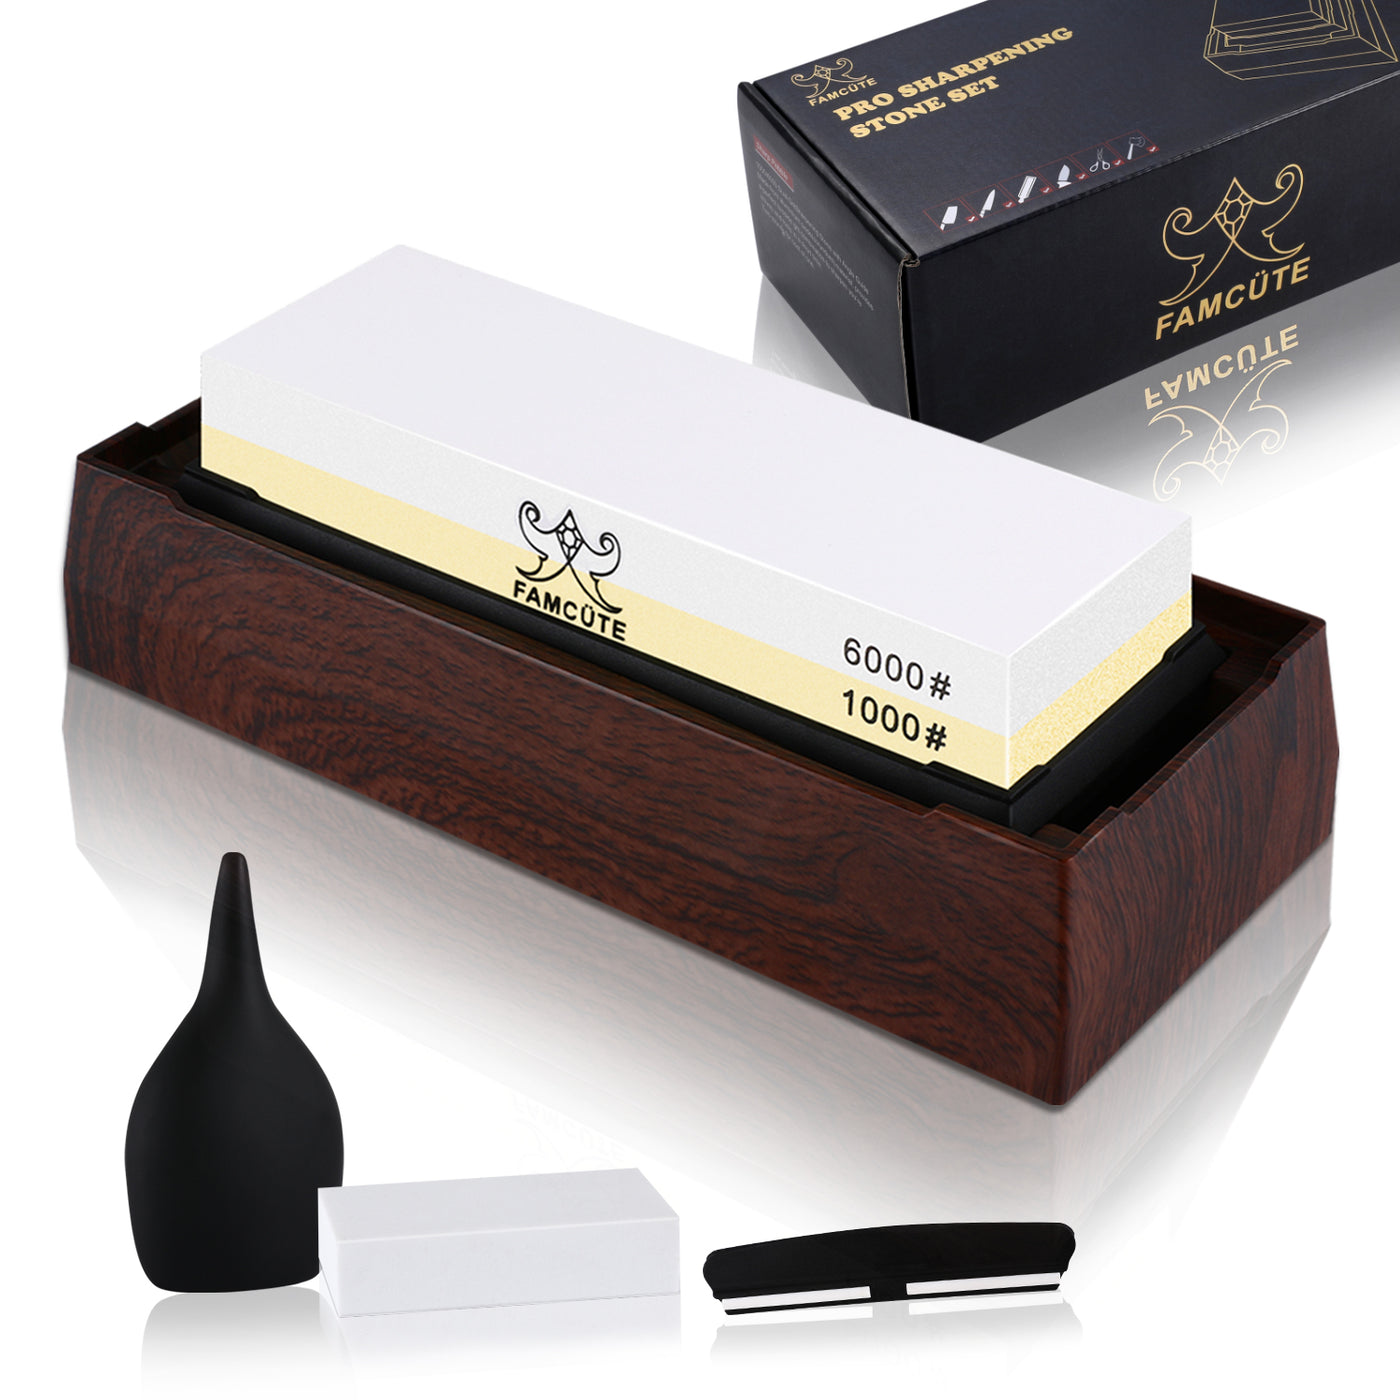 1000 / 6000 Grit Japanese Whetstone Kit With Angle Guide and Bamboo Case  Premium Dual-sided Knife Sharpening Stone sharpening Honing 